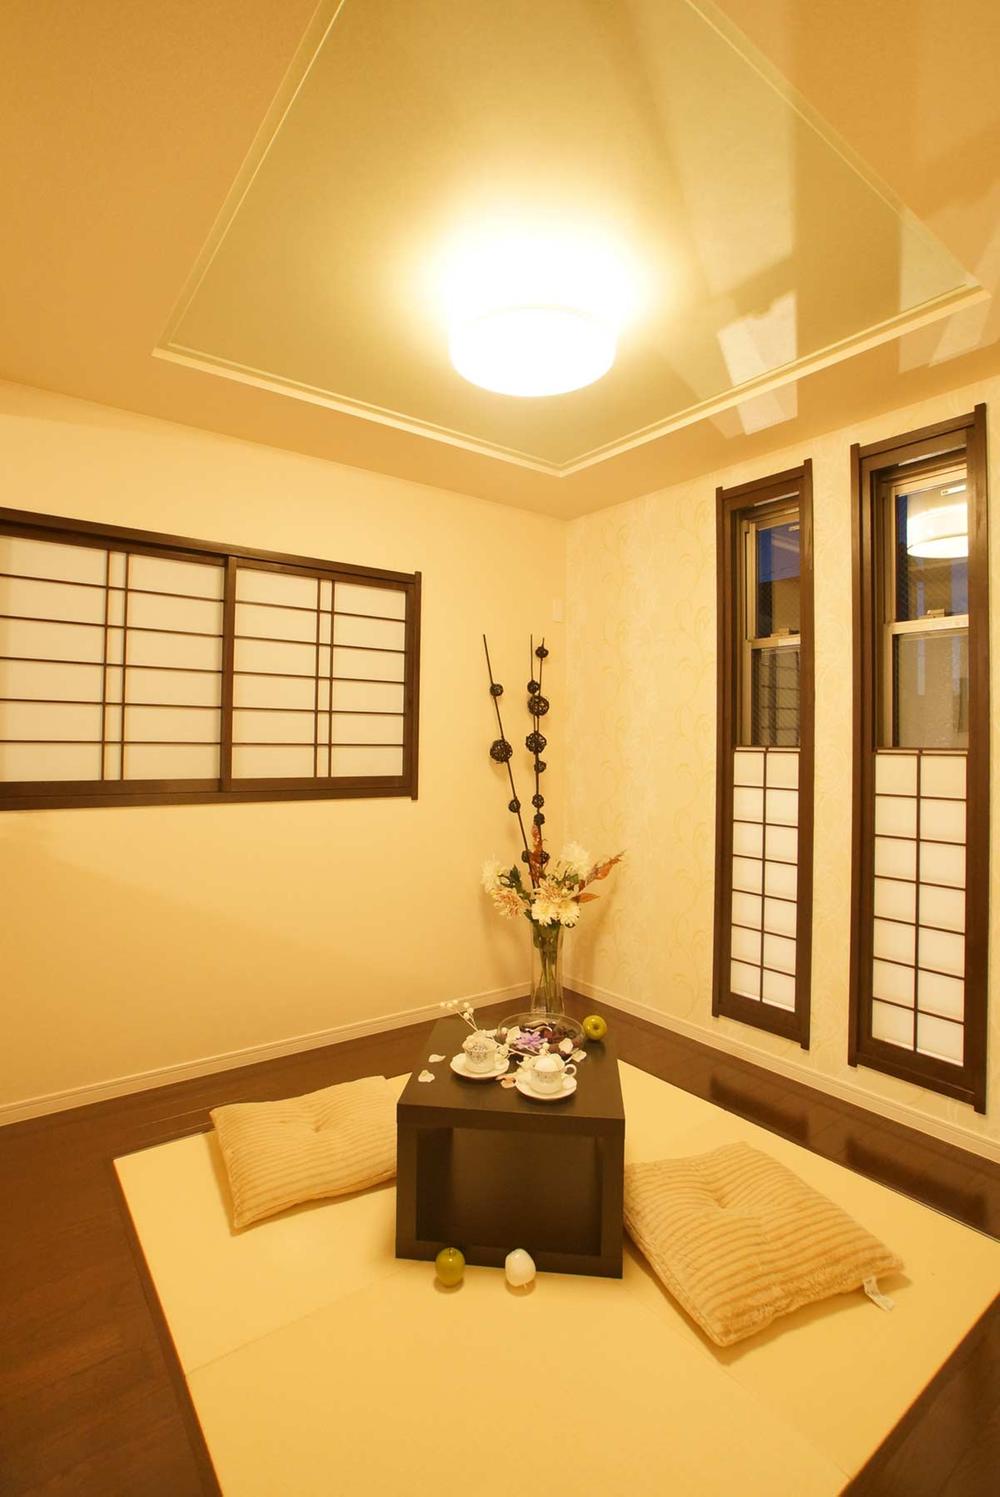 Non-living room. It is a modern Japanese-style sum